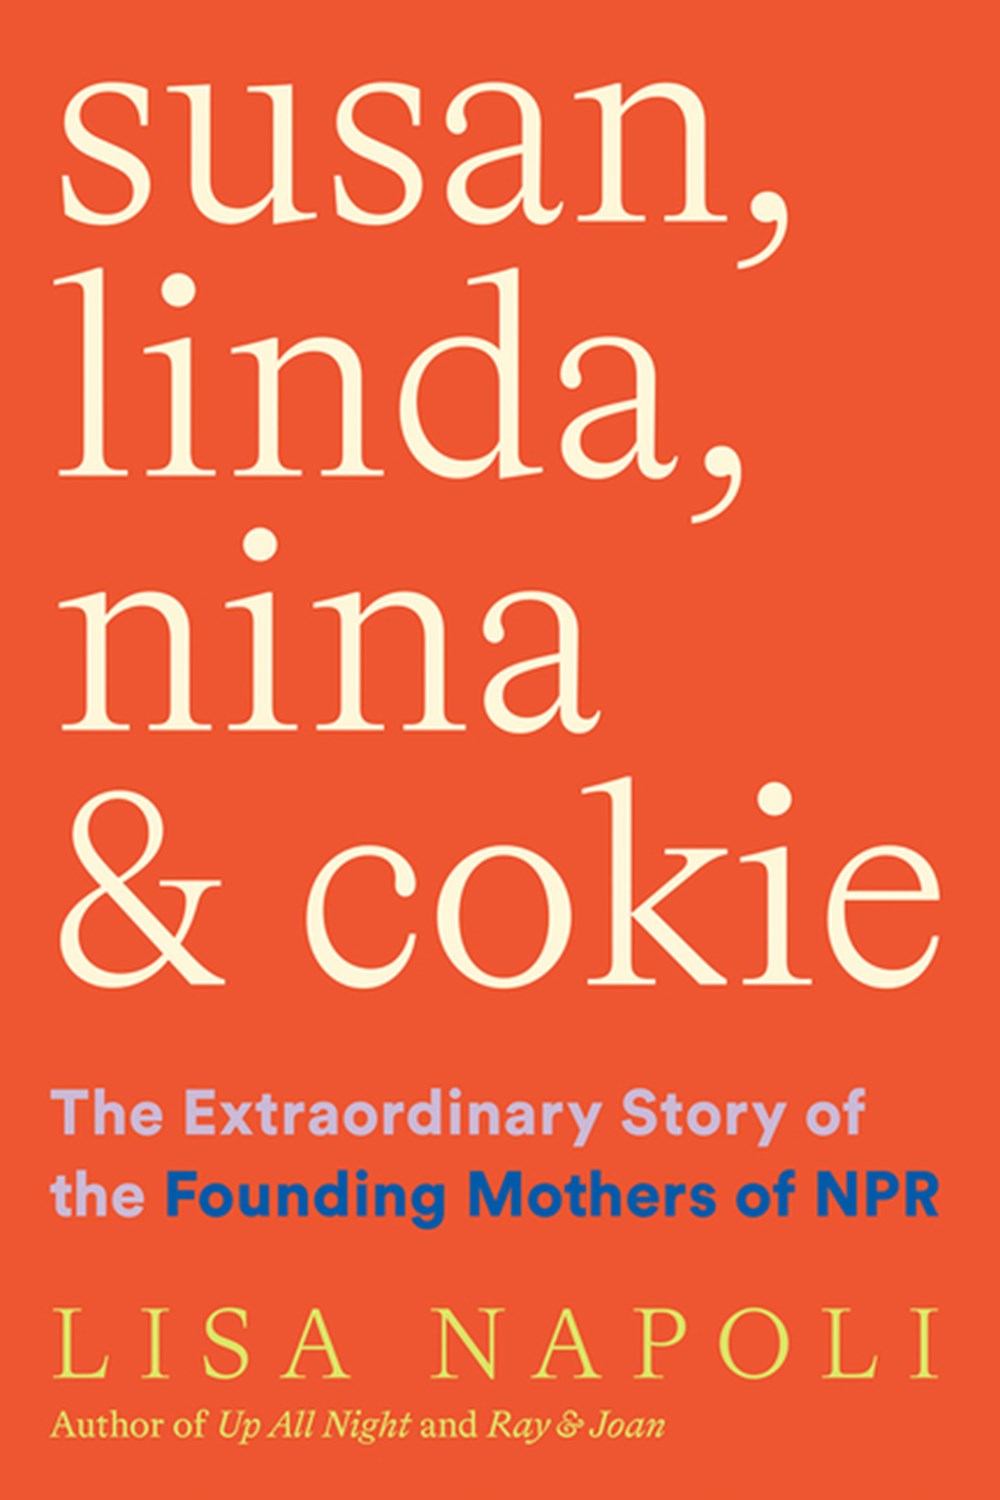 Susan, Linda, Nina, and Cokie The Extraordinary Story of the Founding Mothers of NPR